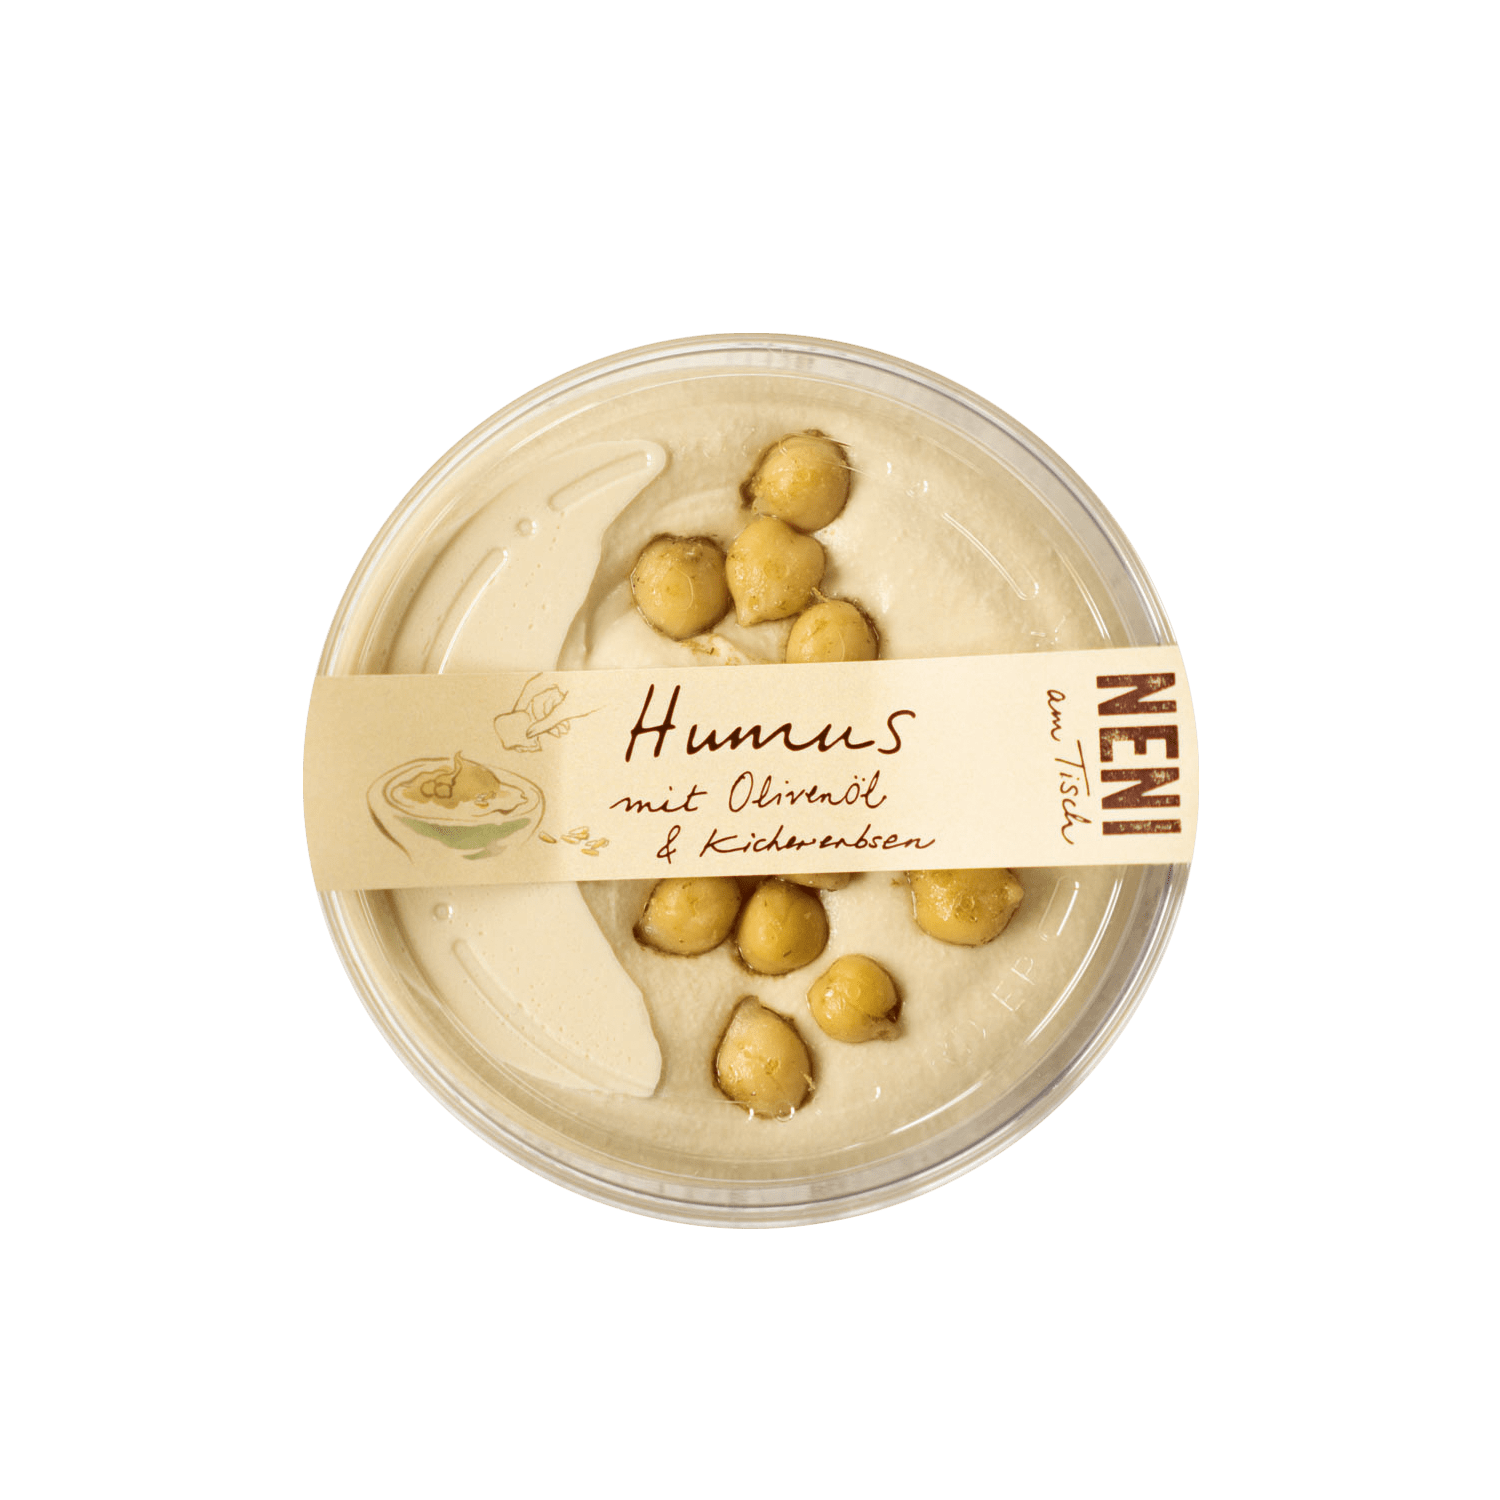 Hummus With Olive Oil & Chickpeas, 200g